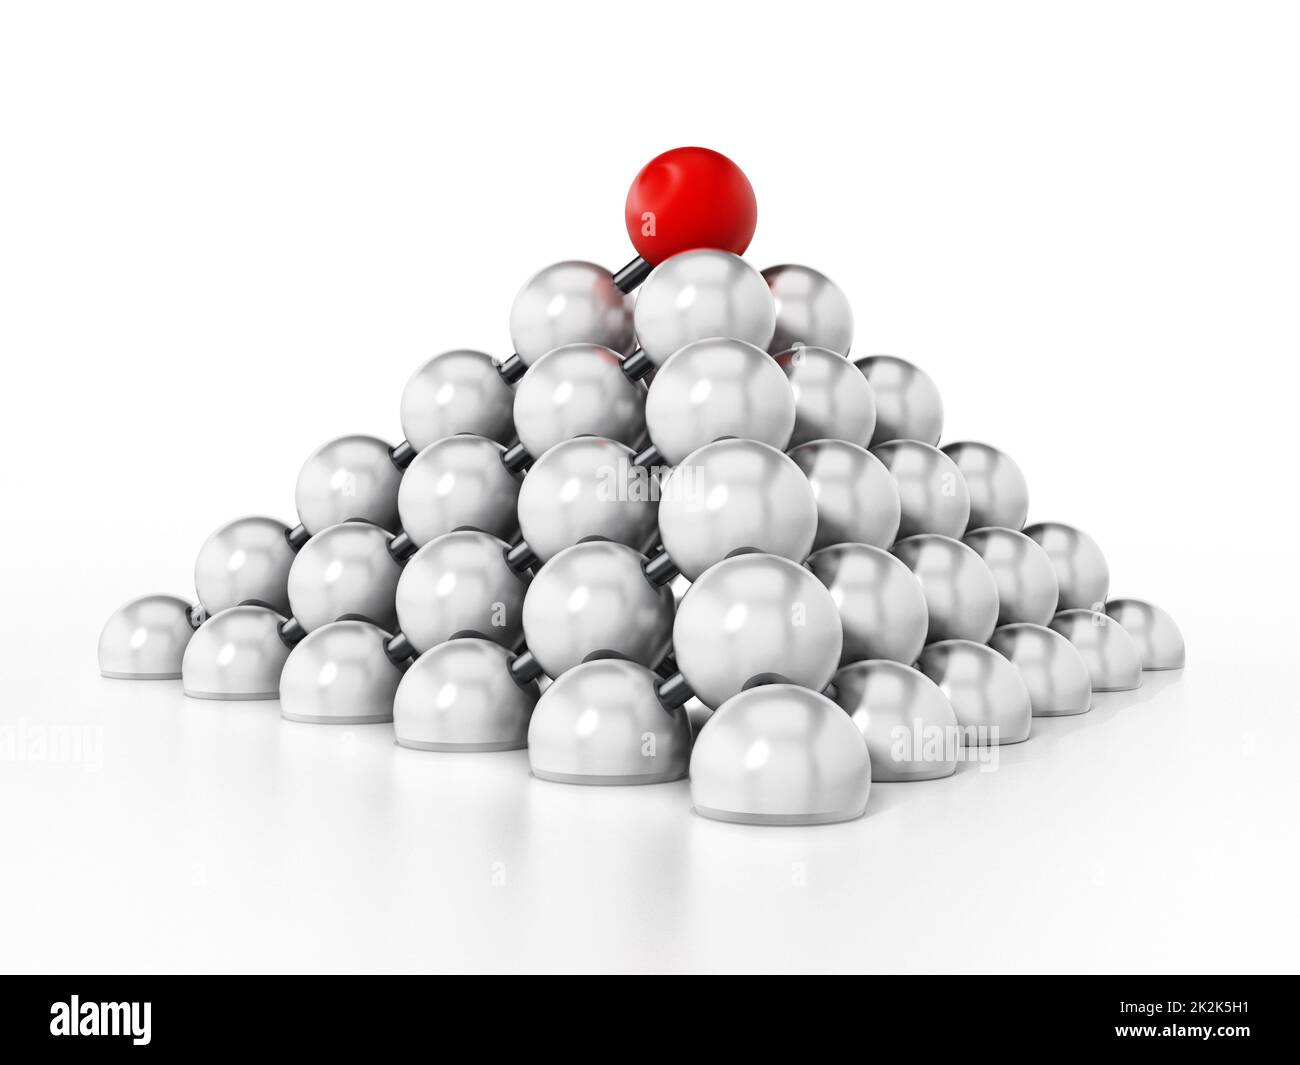 White spheres forming a pyramid shape. 3D illustration Stock Photo